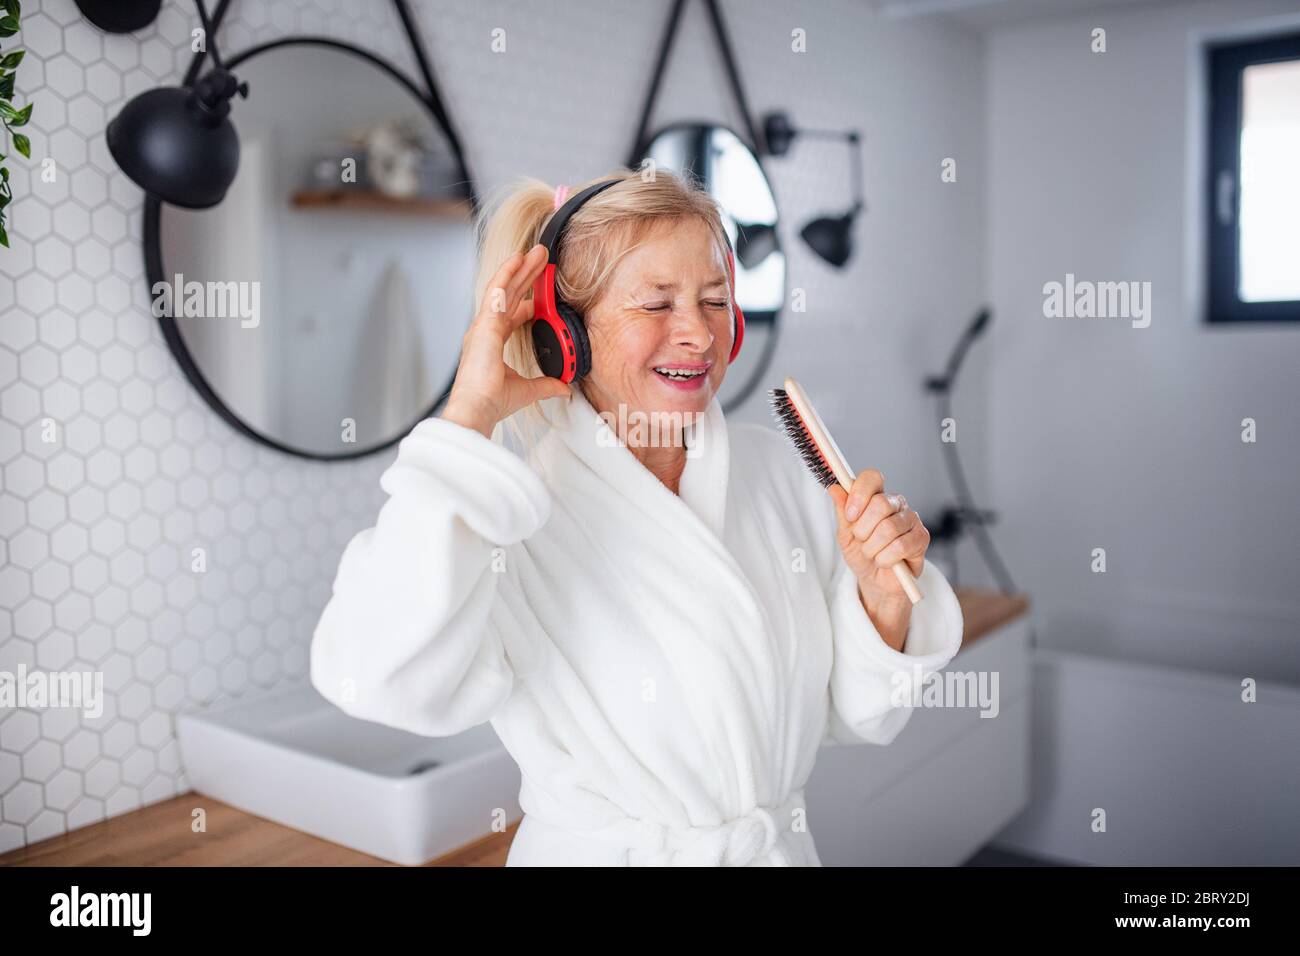 Portrait of senior woman with headphones and bathrobe indoors at home. Stock Photo